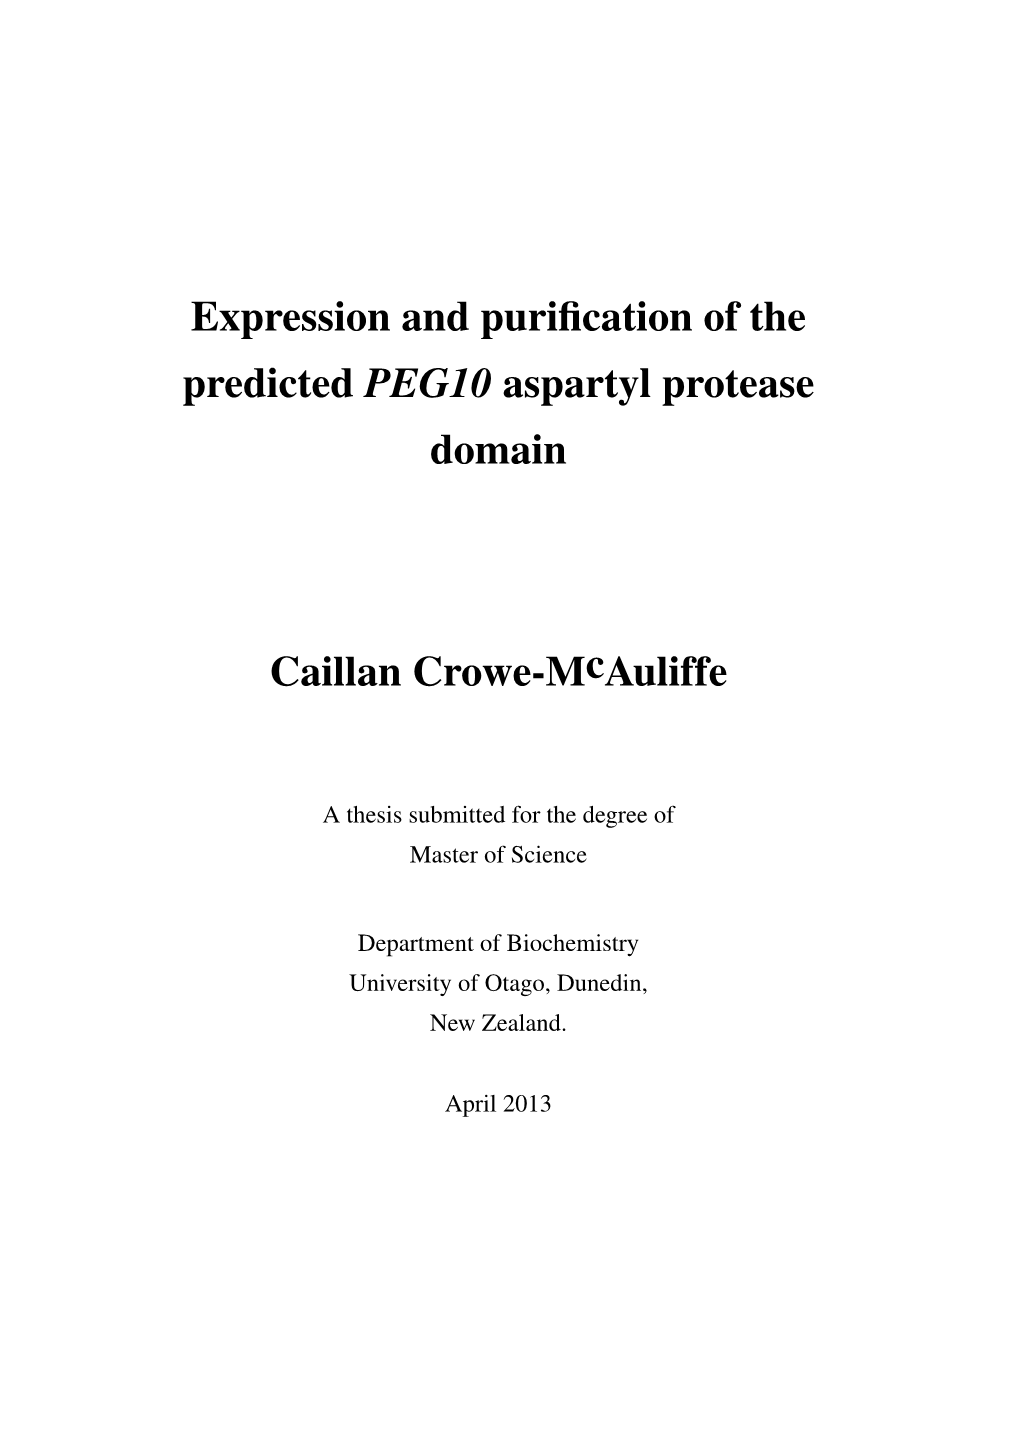 Expression and Purification of the Predicted PEG10 Aspartyl Protease